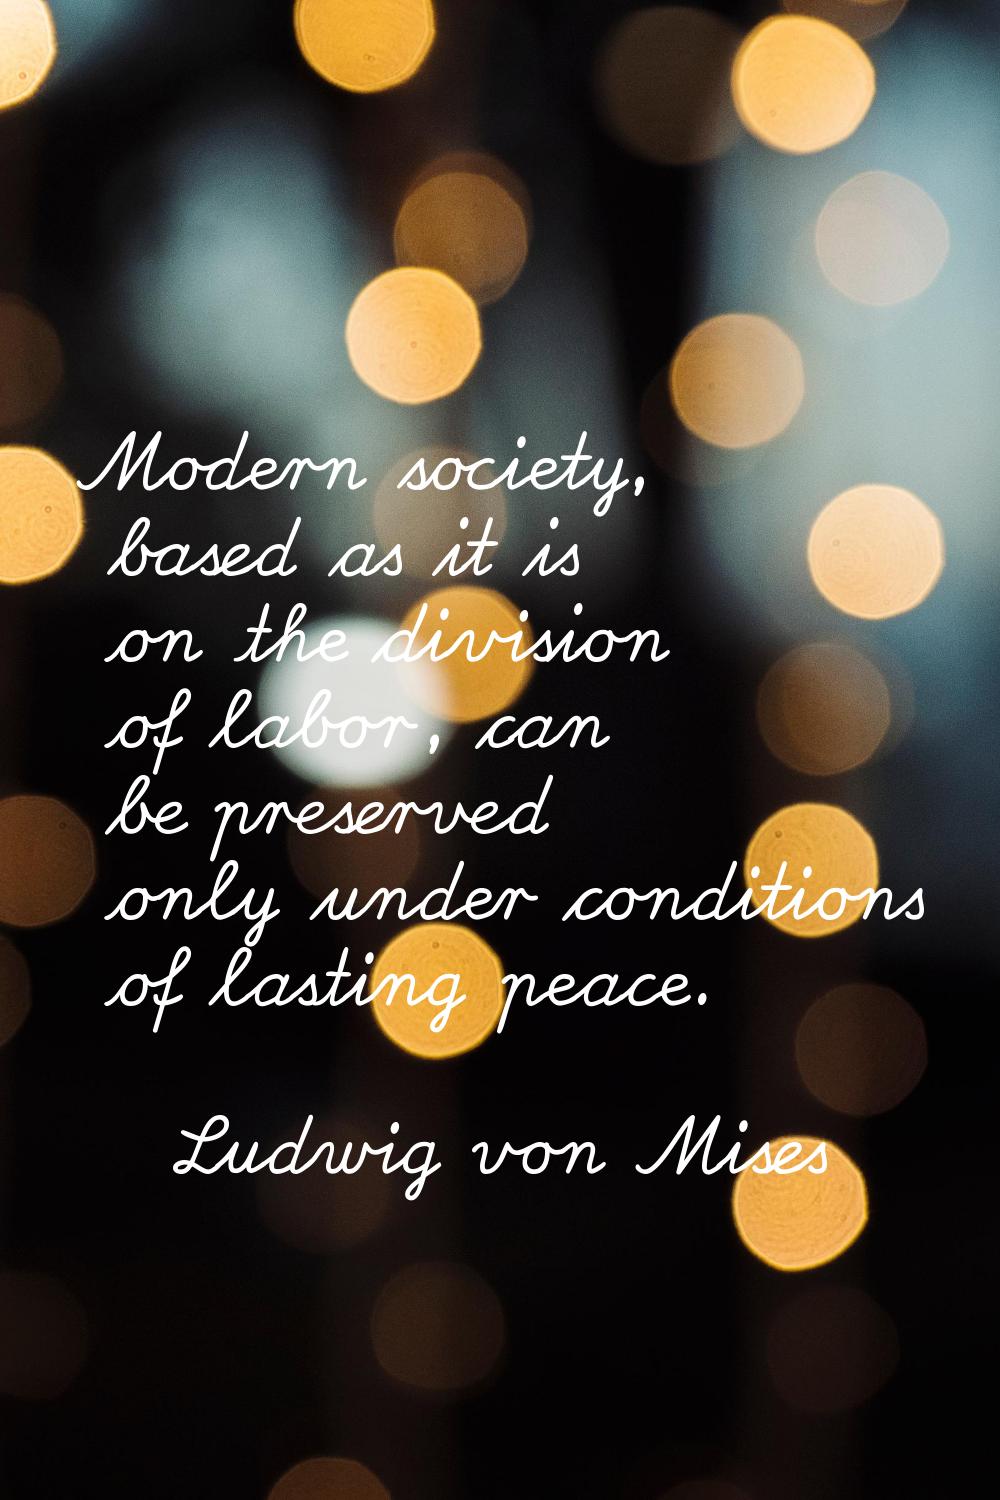 Modern society, based as it is on the division of labor, can be preserved only under conditions of 